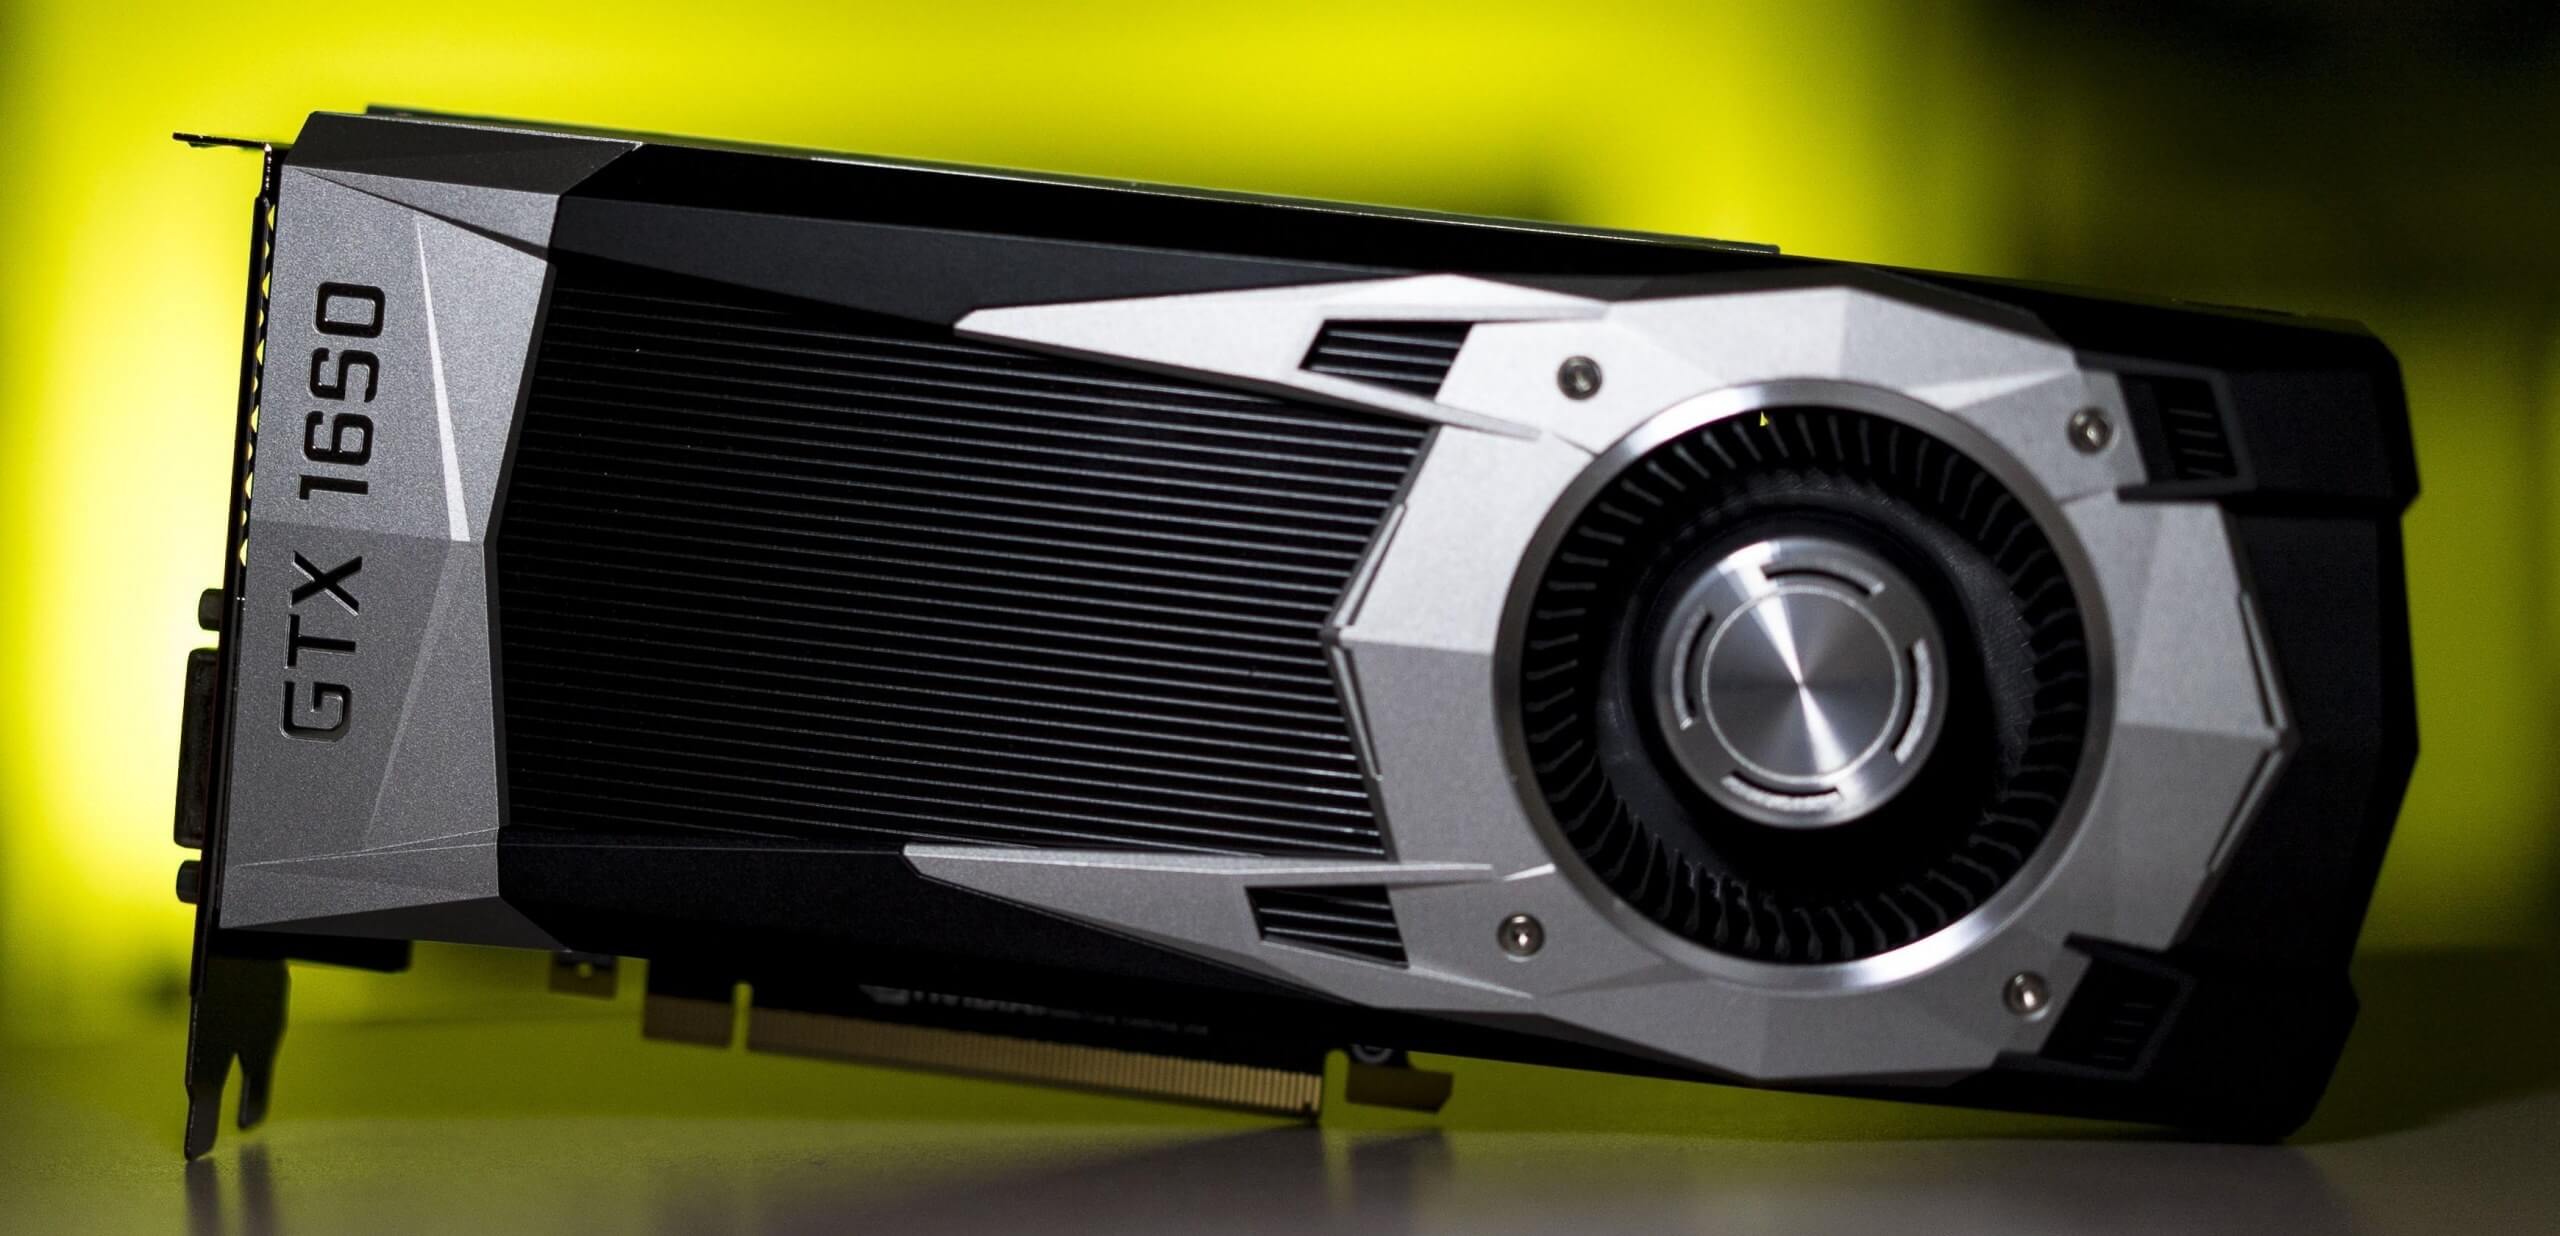 GeForce GTX 1650 matches the RX 570 in one FFXV benchmark, but is beat by the GTX 1050 Ti in another